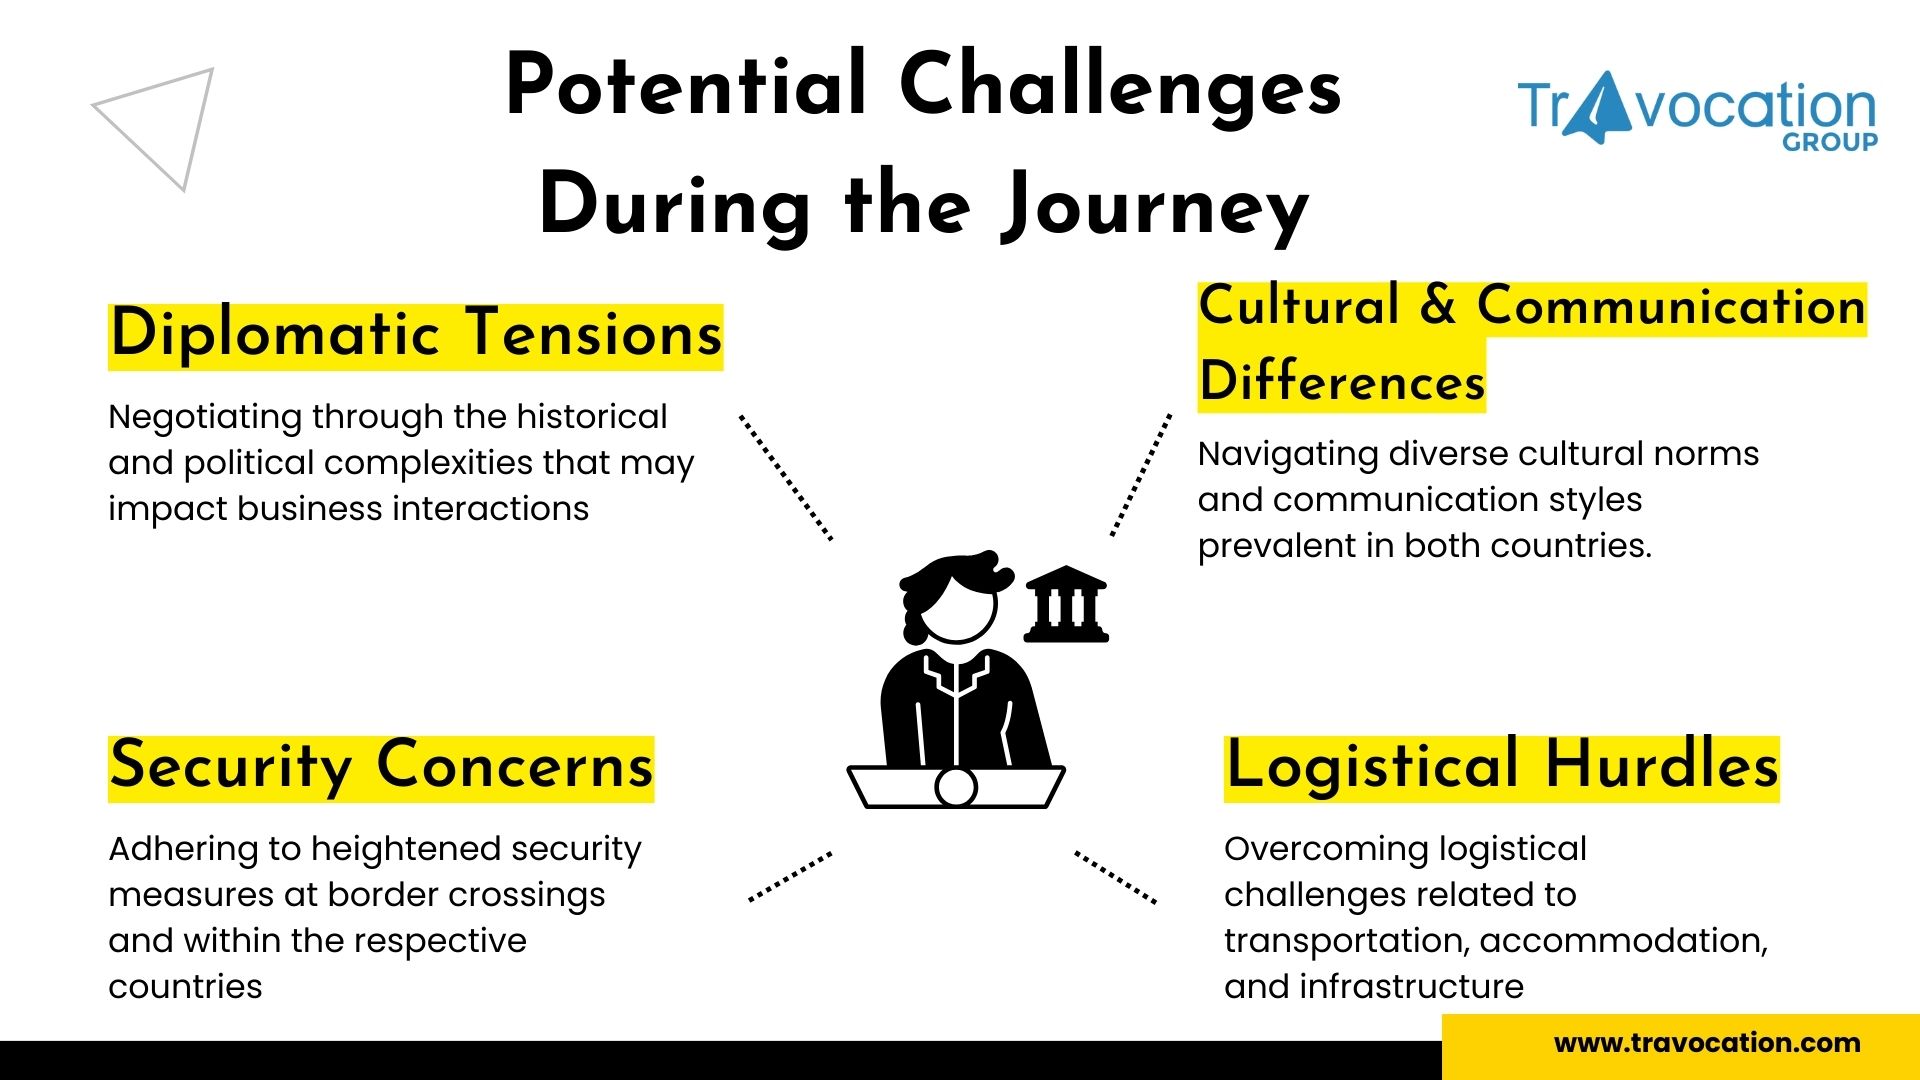 Potential Challenges During the Journey